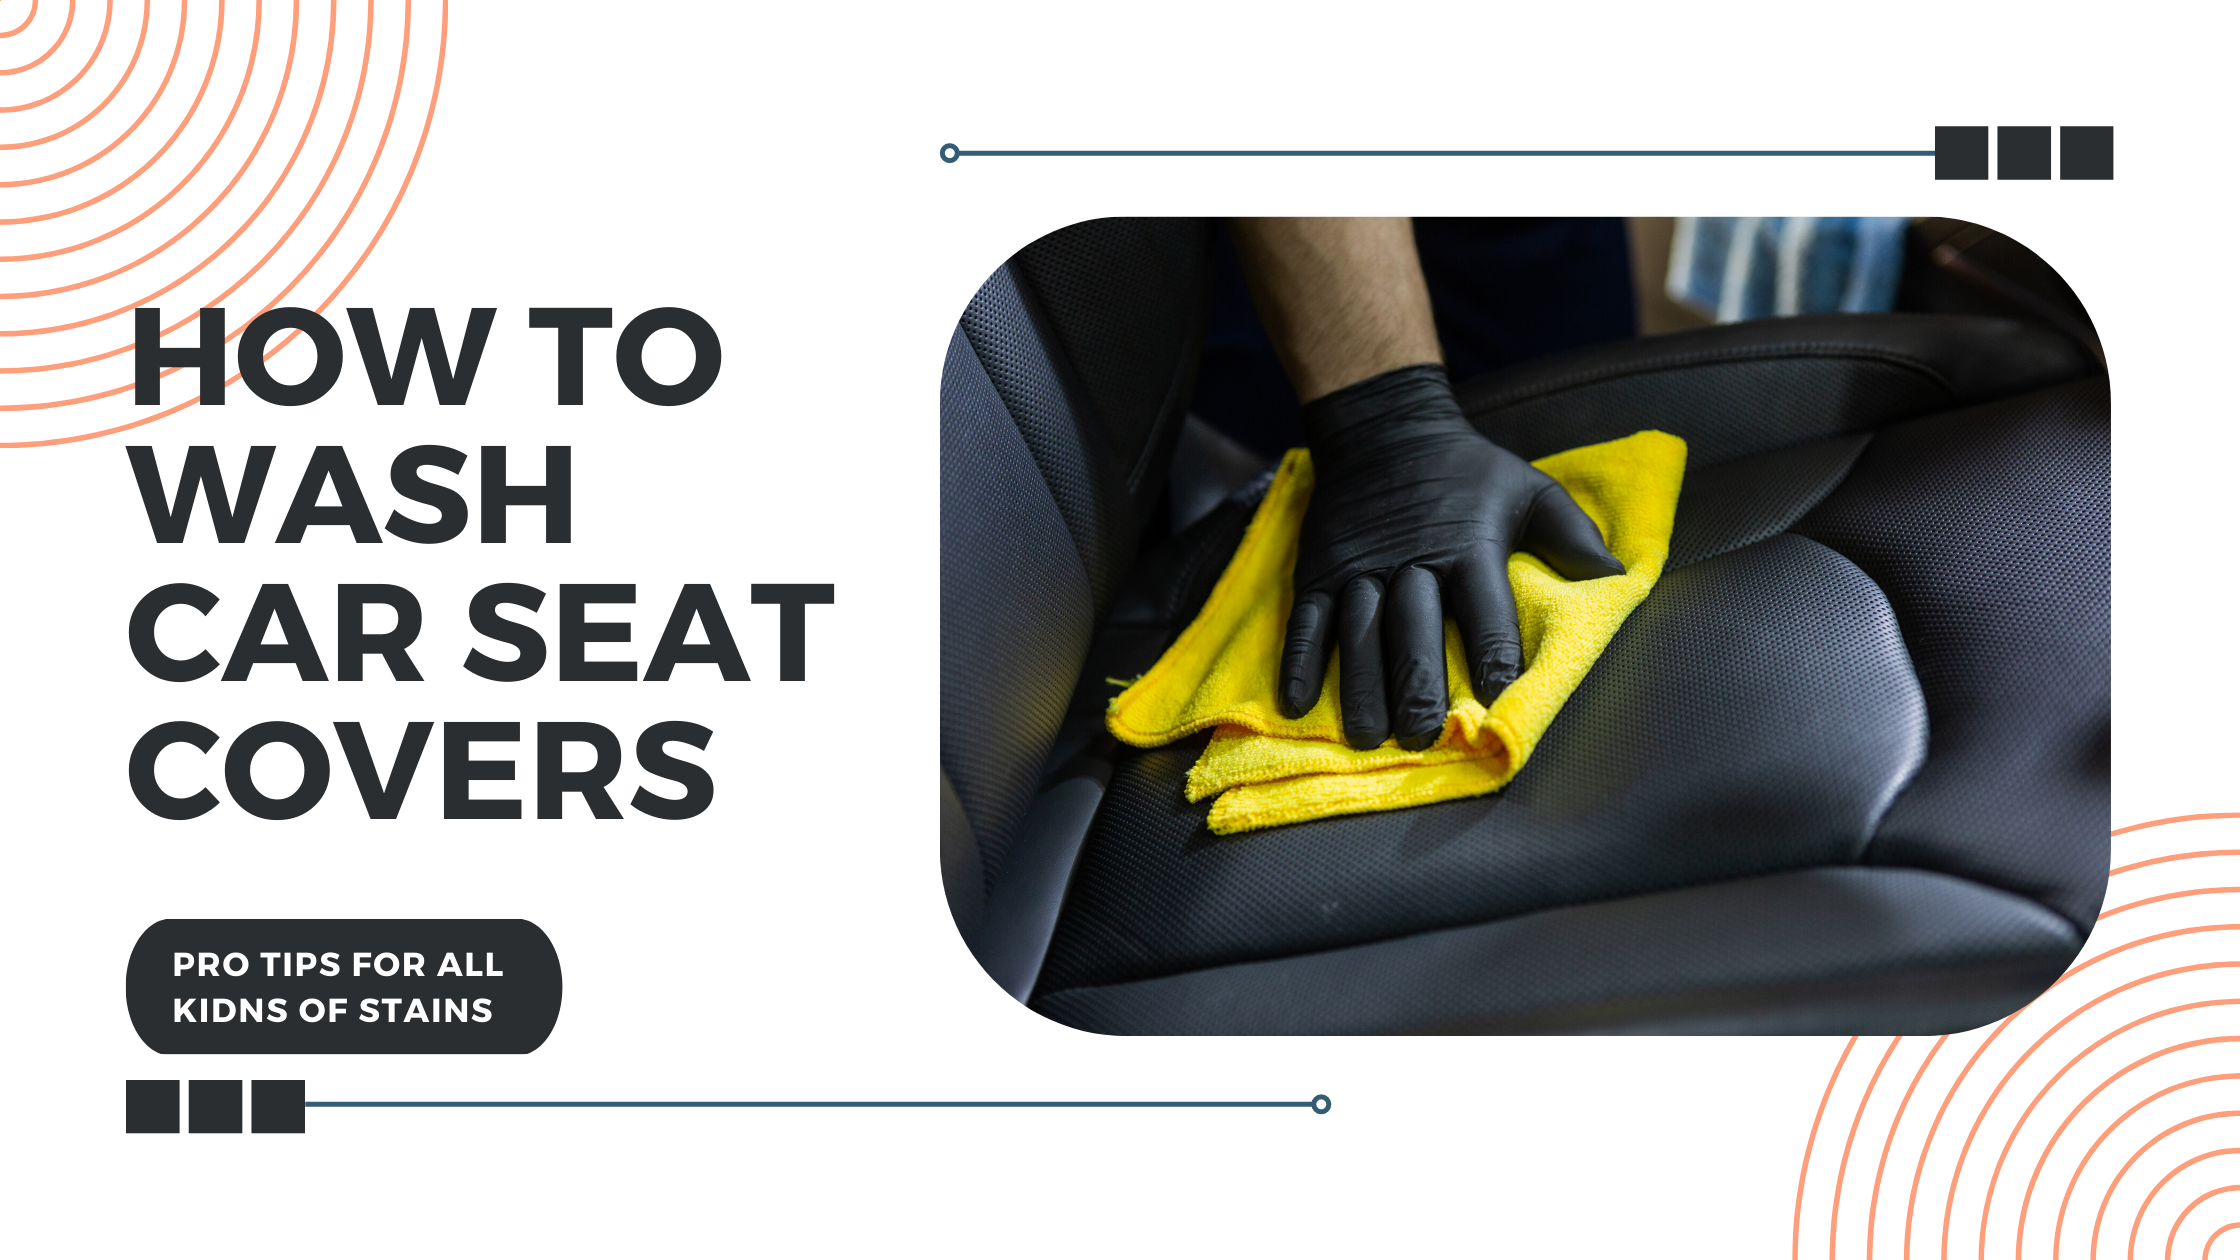 How-to-wash-car-seat-cover